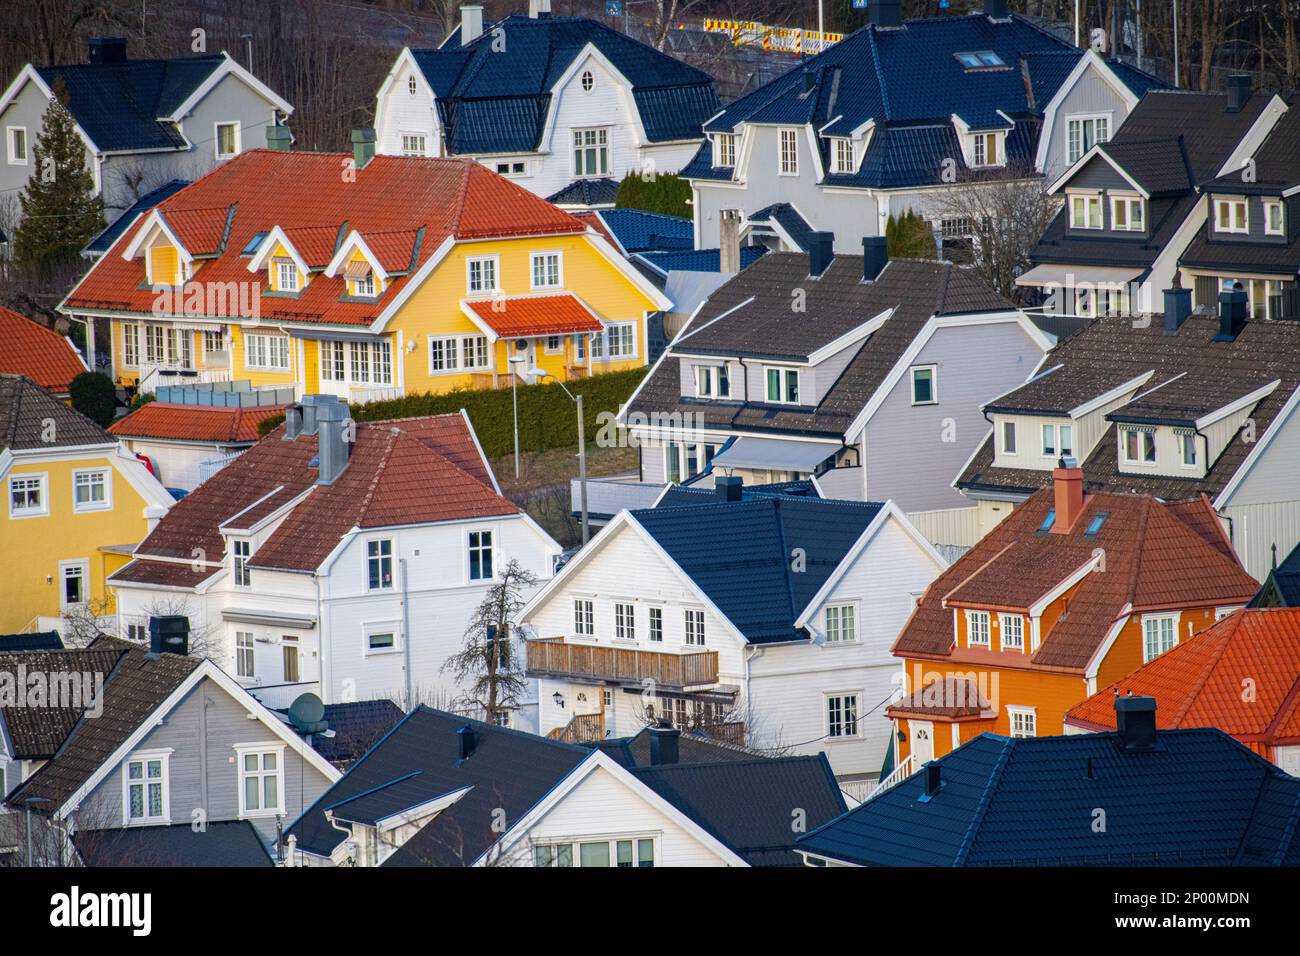 Traditional brightly coloured housing architecture in Tonsberg, Norway. Stock Photo